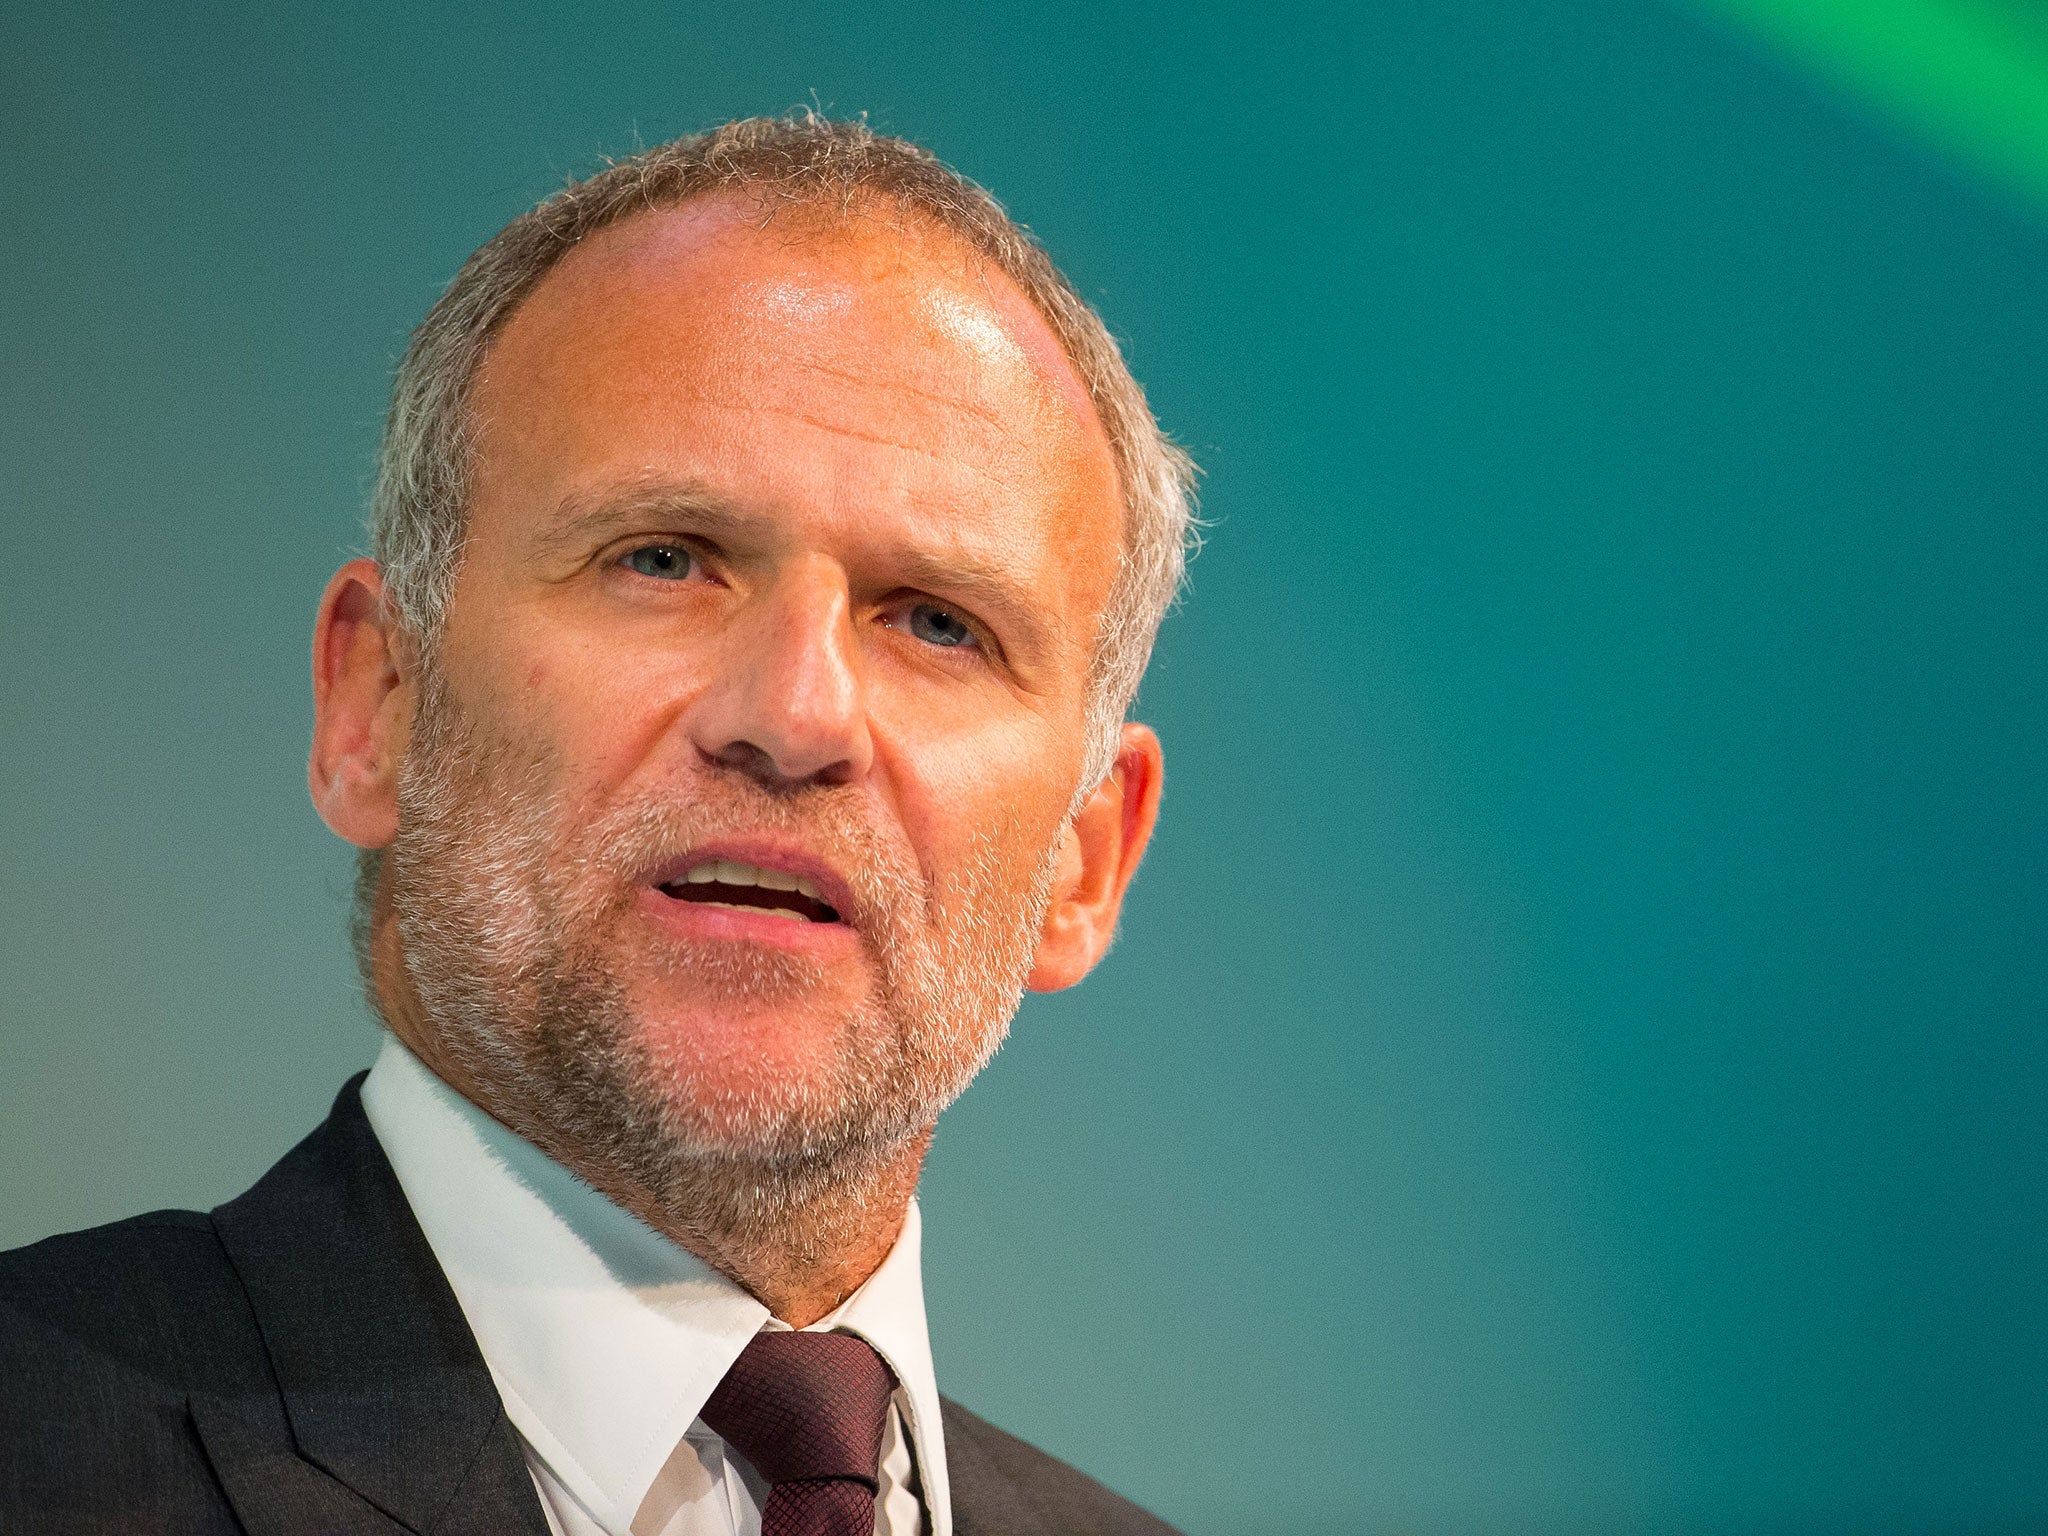 He has had a career in supply, so Dave Lewis is well placed to change the culture at Tesco